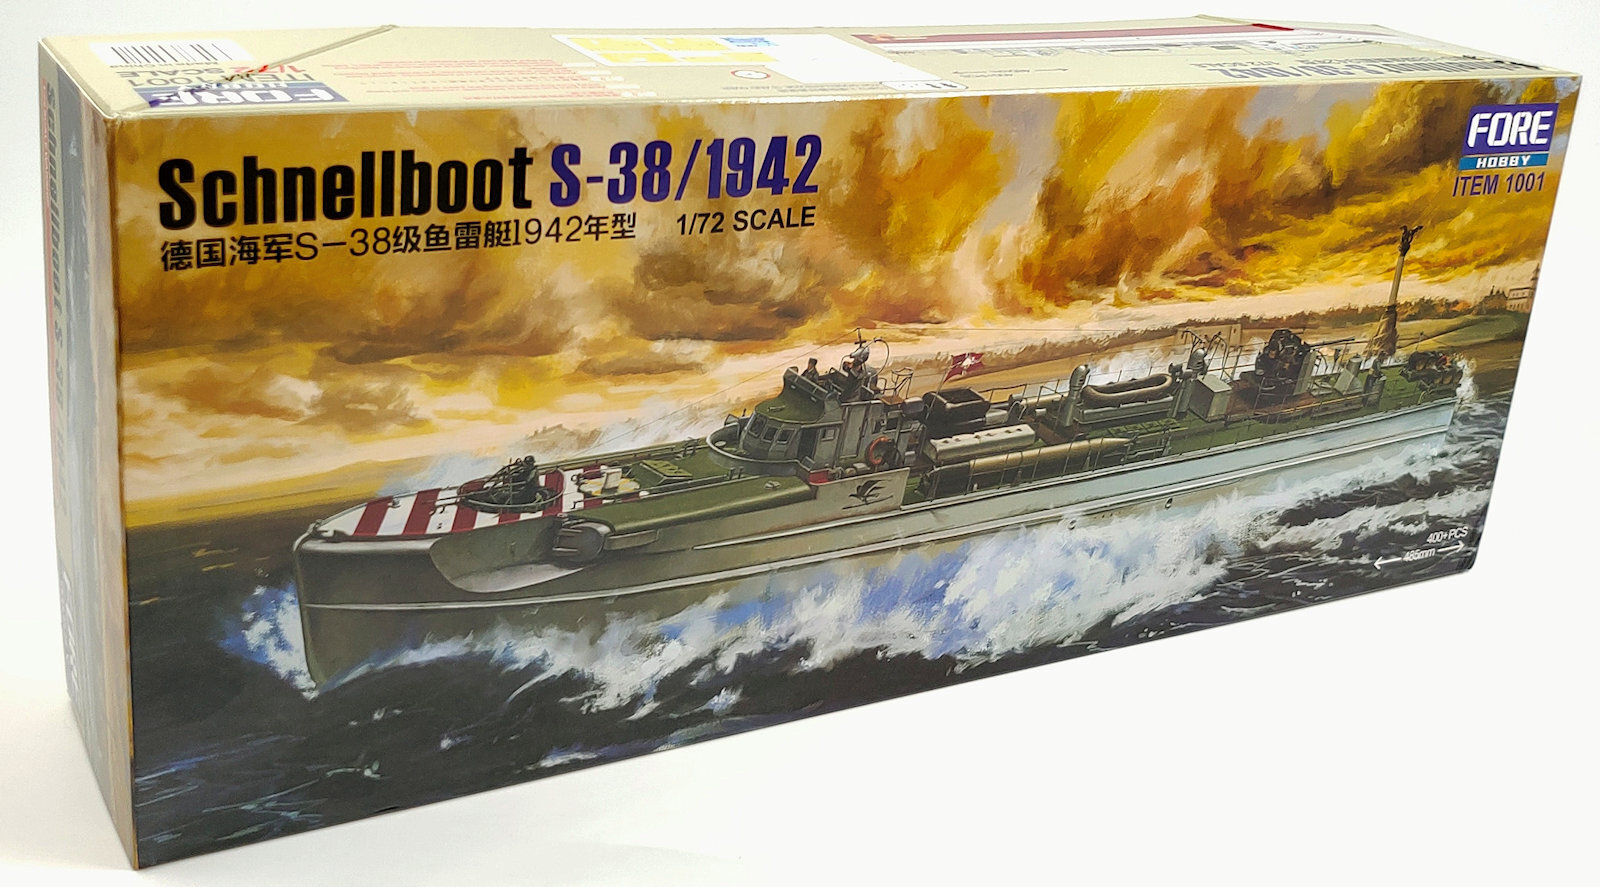 SchnellBoat 1/72 Fore Hobby. 93qz